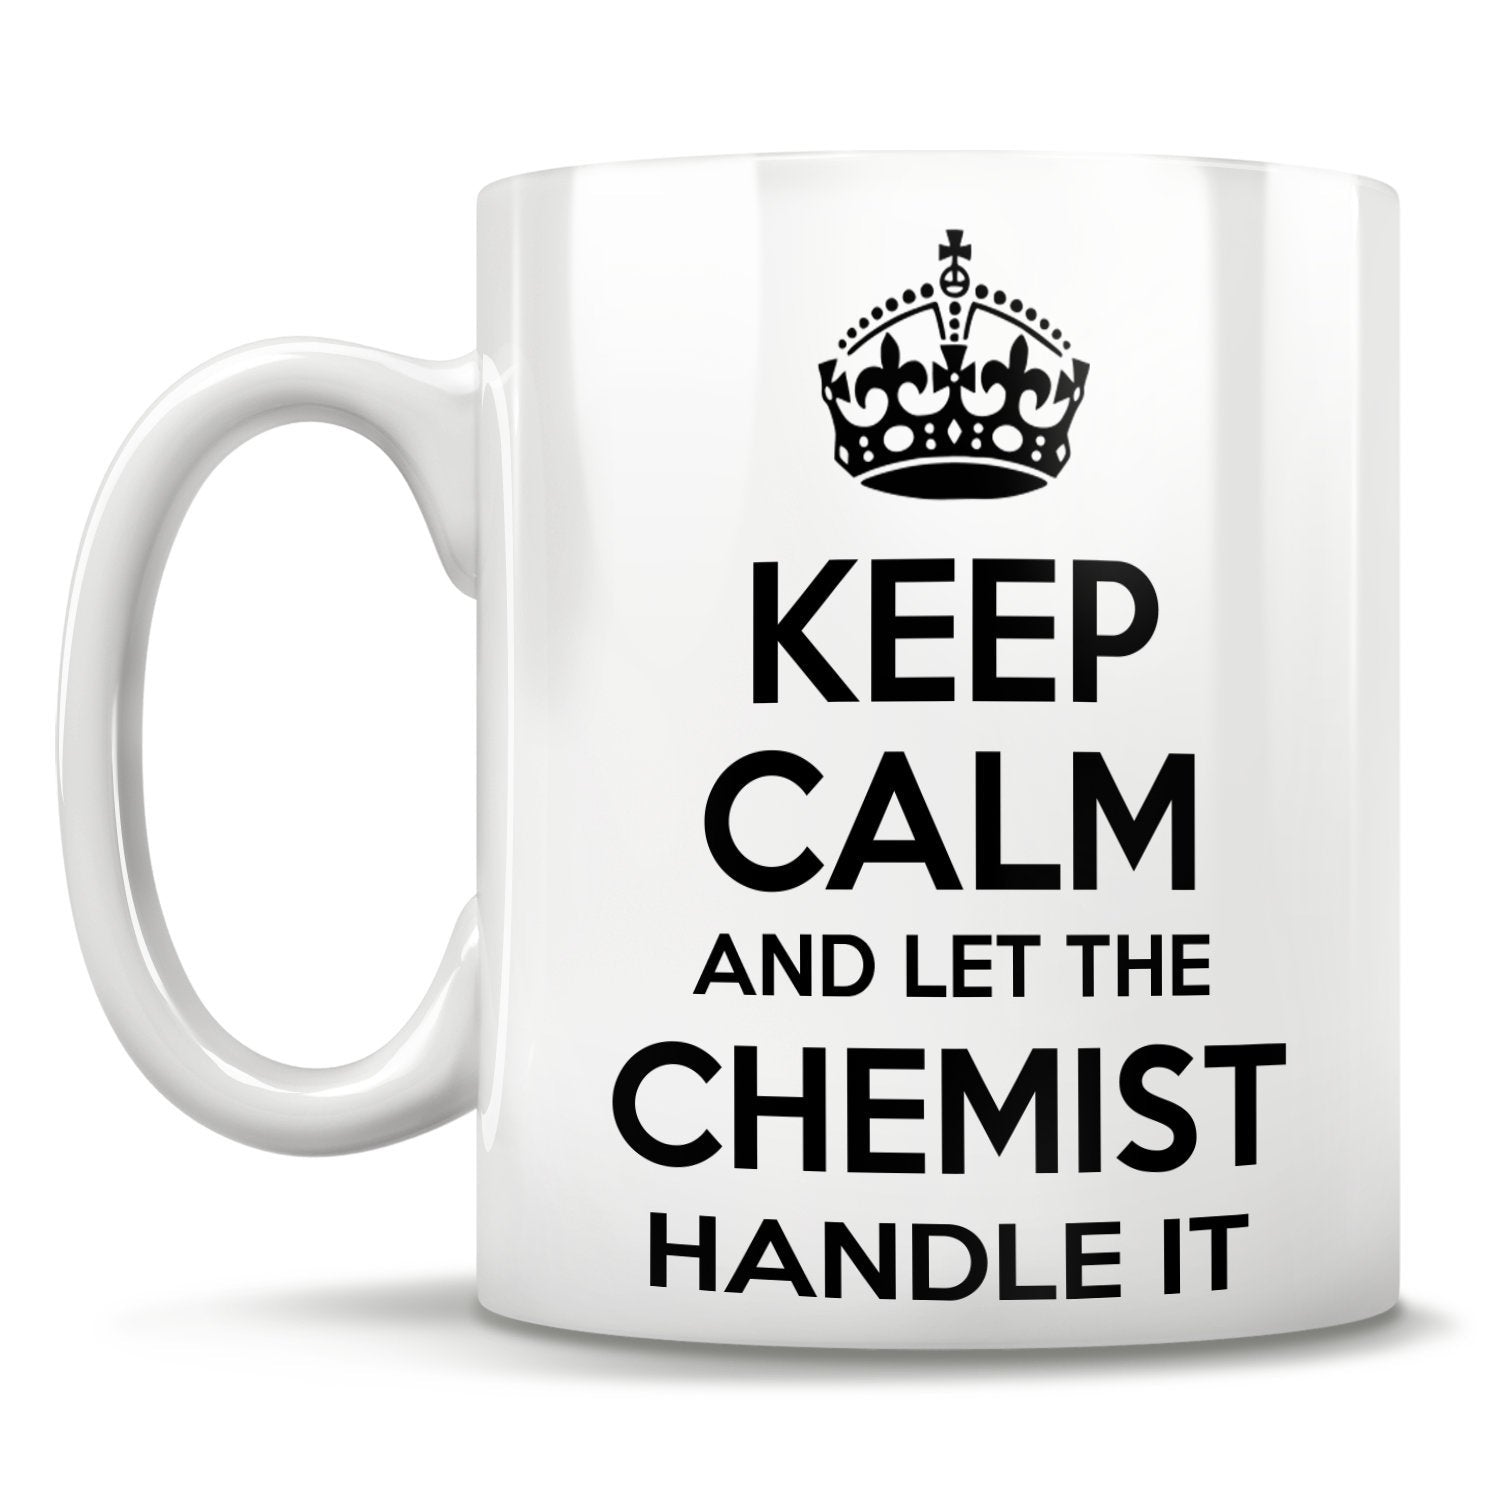 Gifts for chemist, chemist trophy cup gift